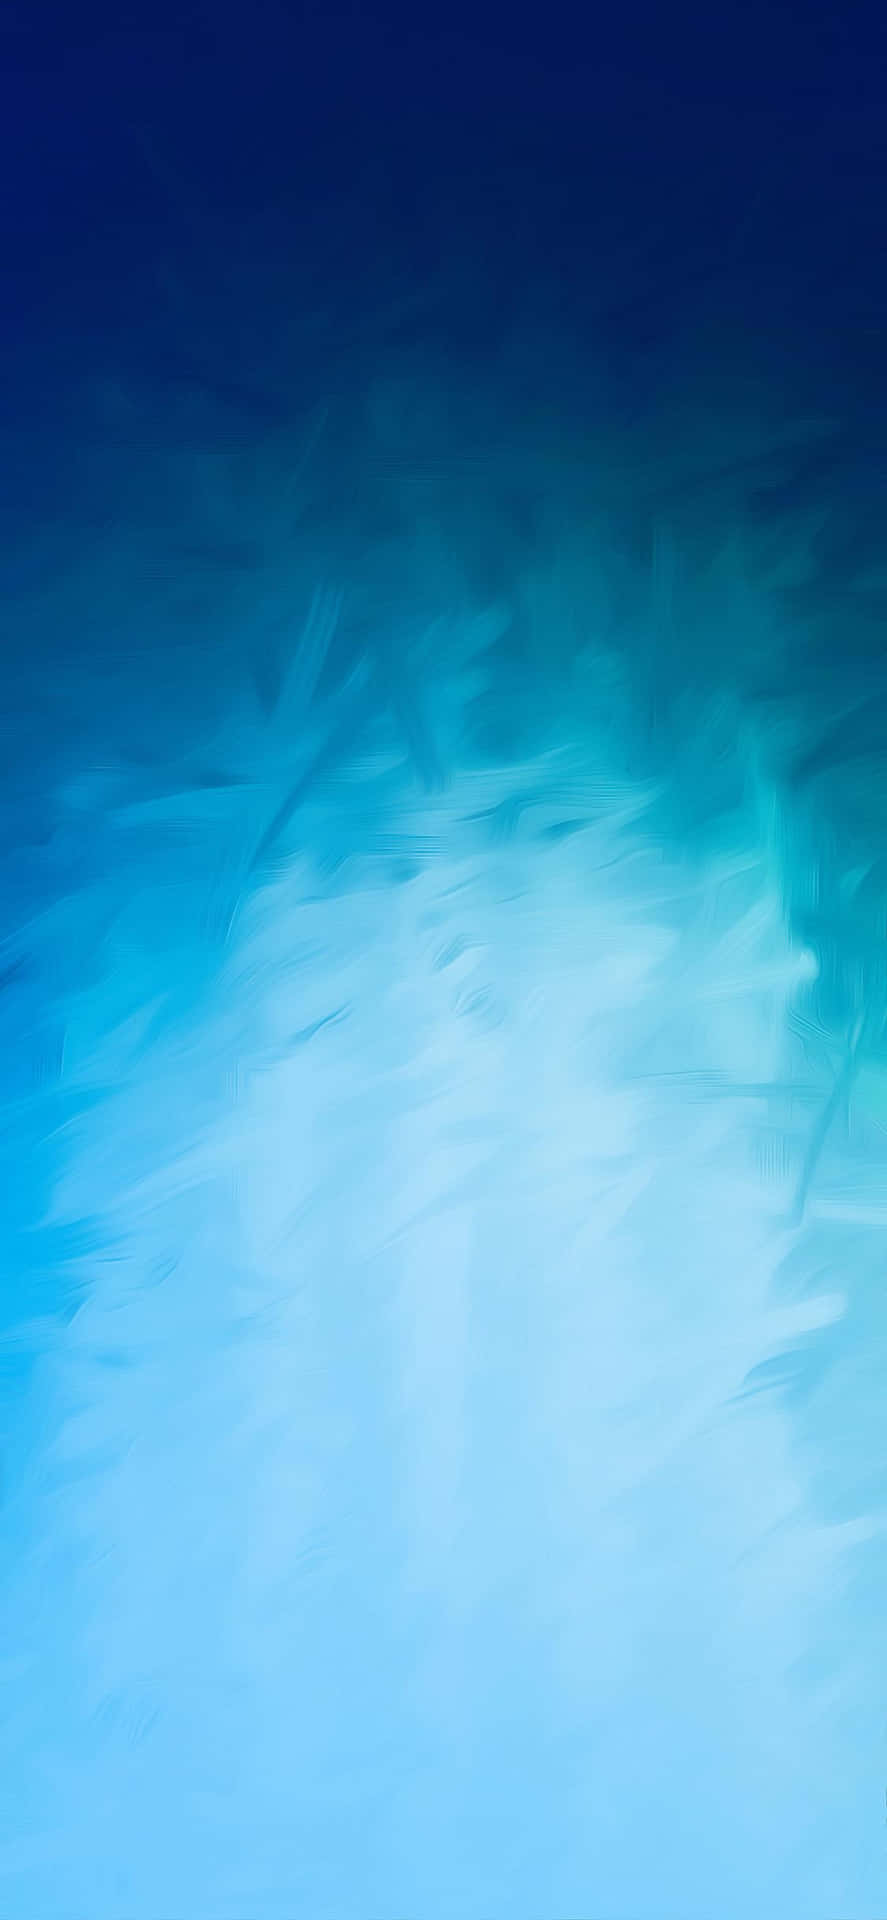 Iphone X Abstract Blue Wallpaper